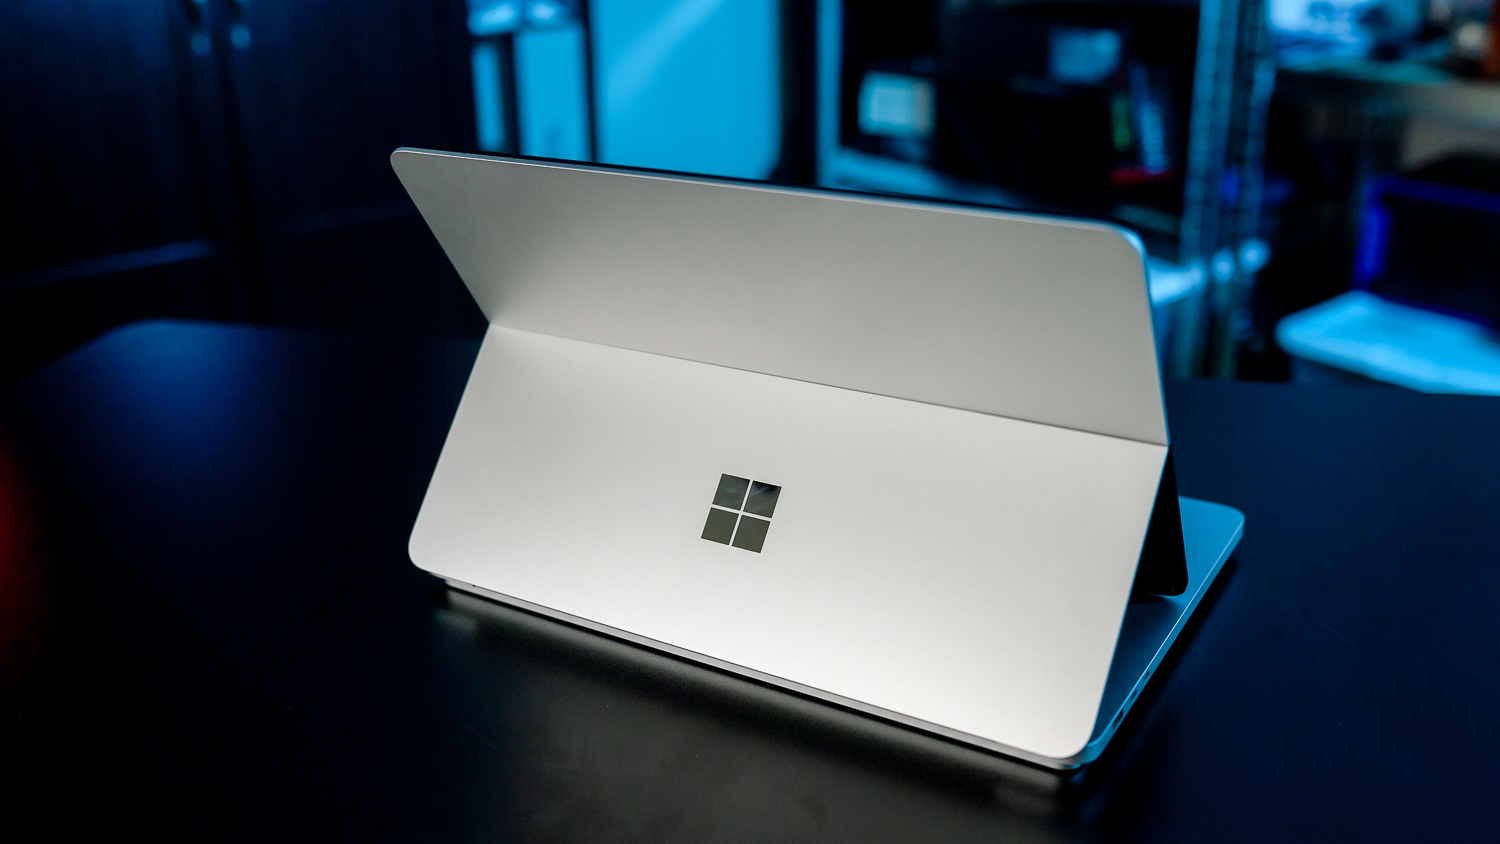 Surface Pro 4 Review: The Laptop of the Future! 